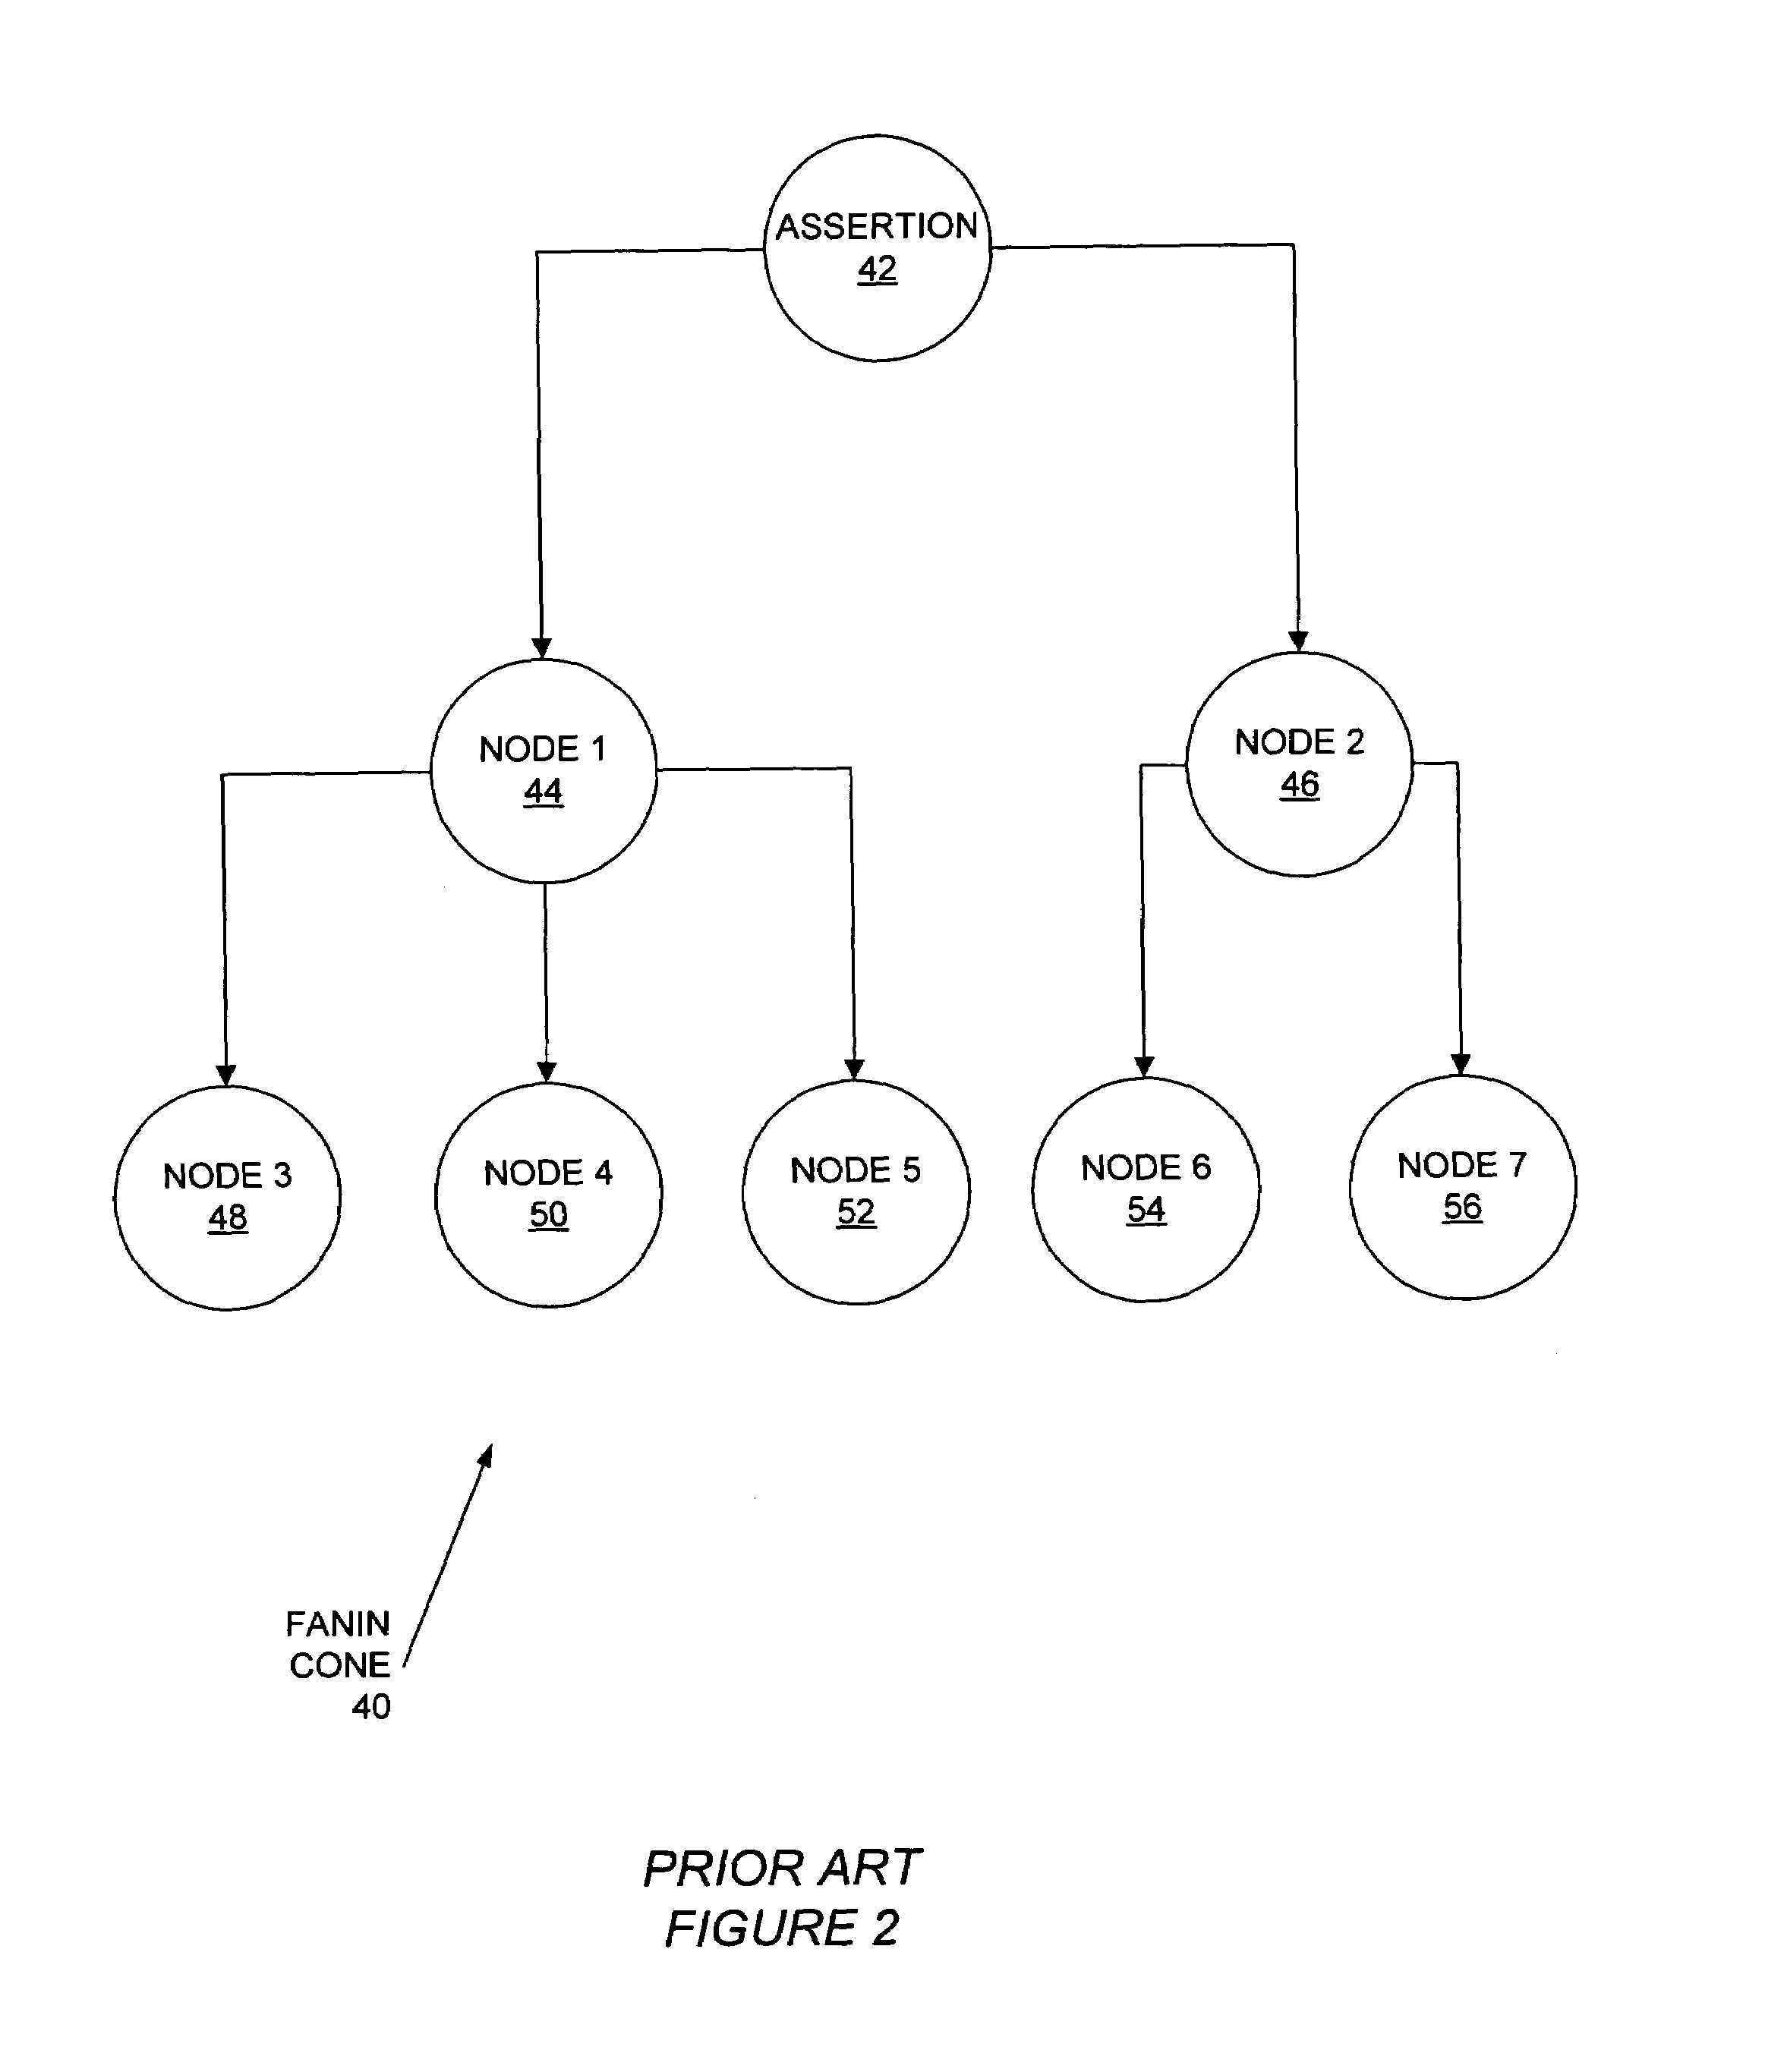 Method and apparatus for generating minimal node data and dynamic assertions for a simulation